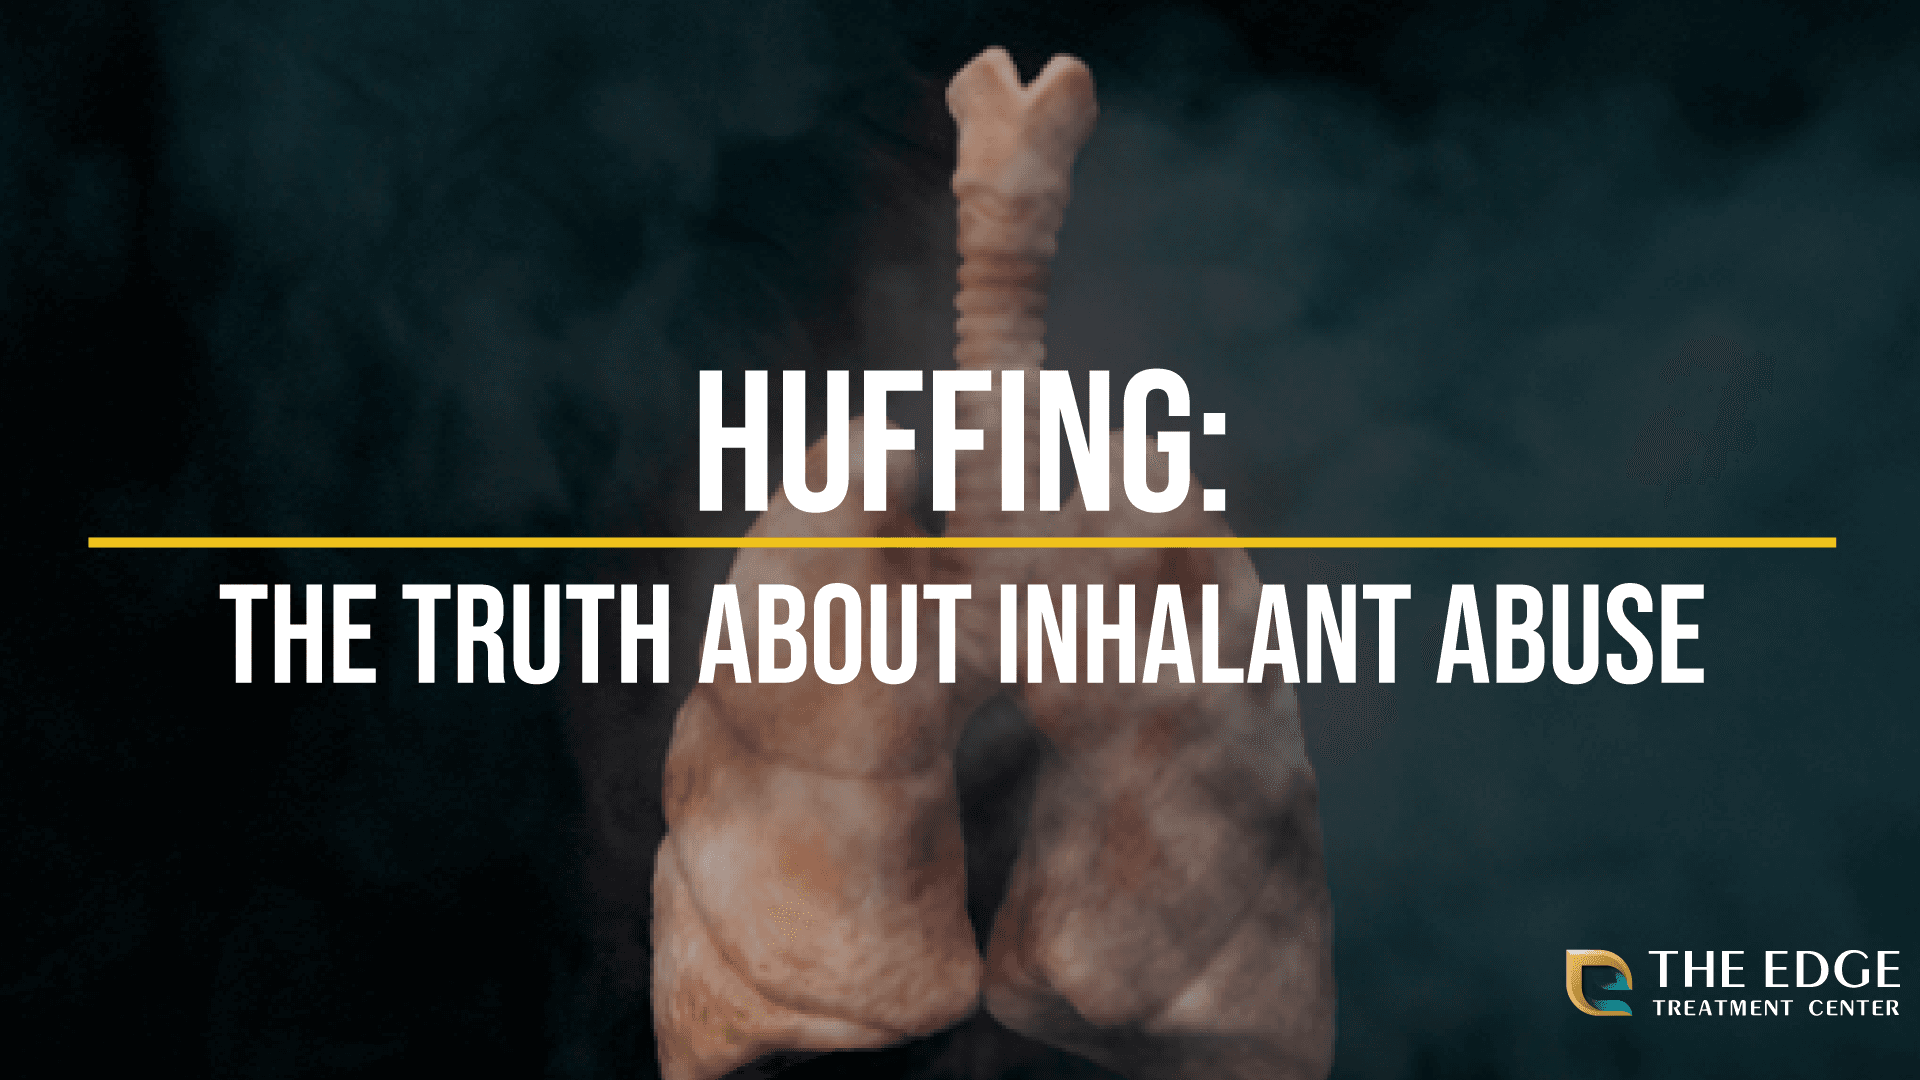 What is Huffing?